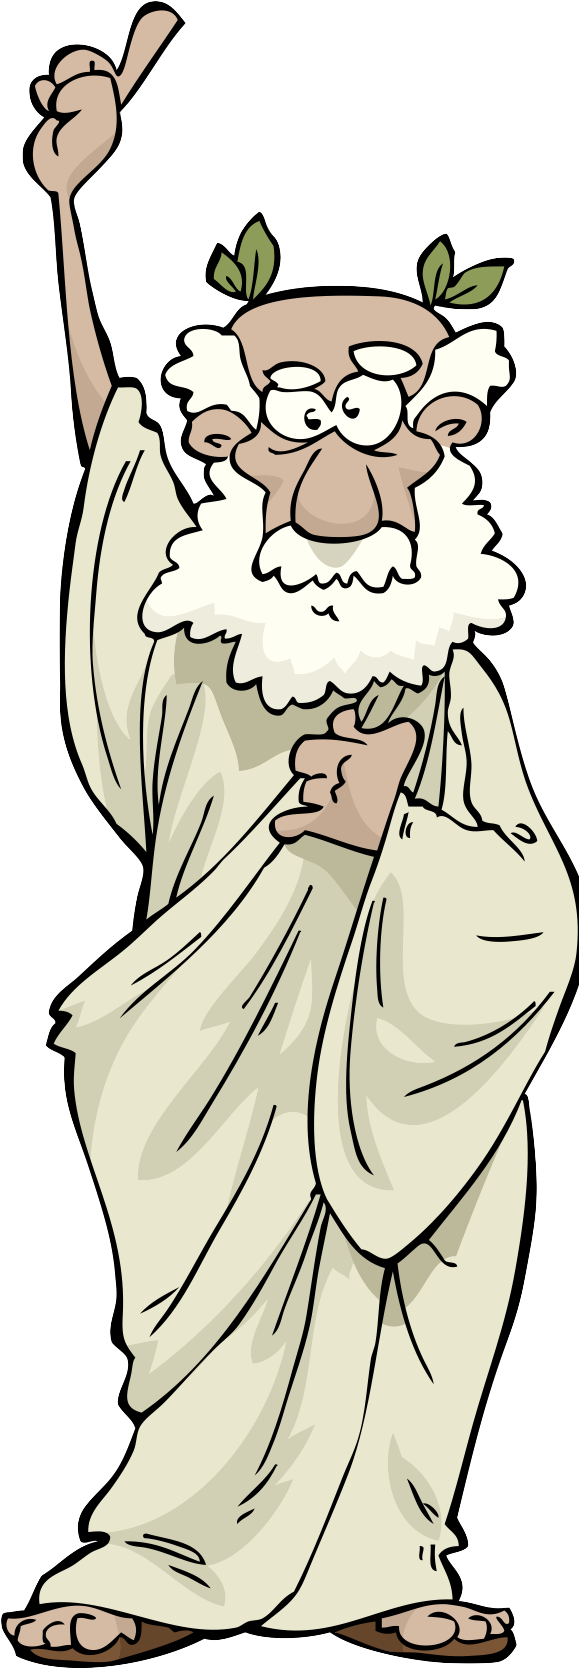 cartoon image of a Greek philosopher making a point